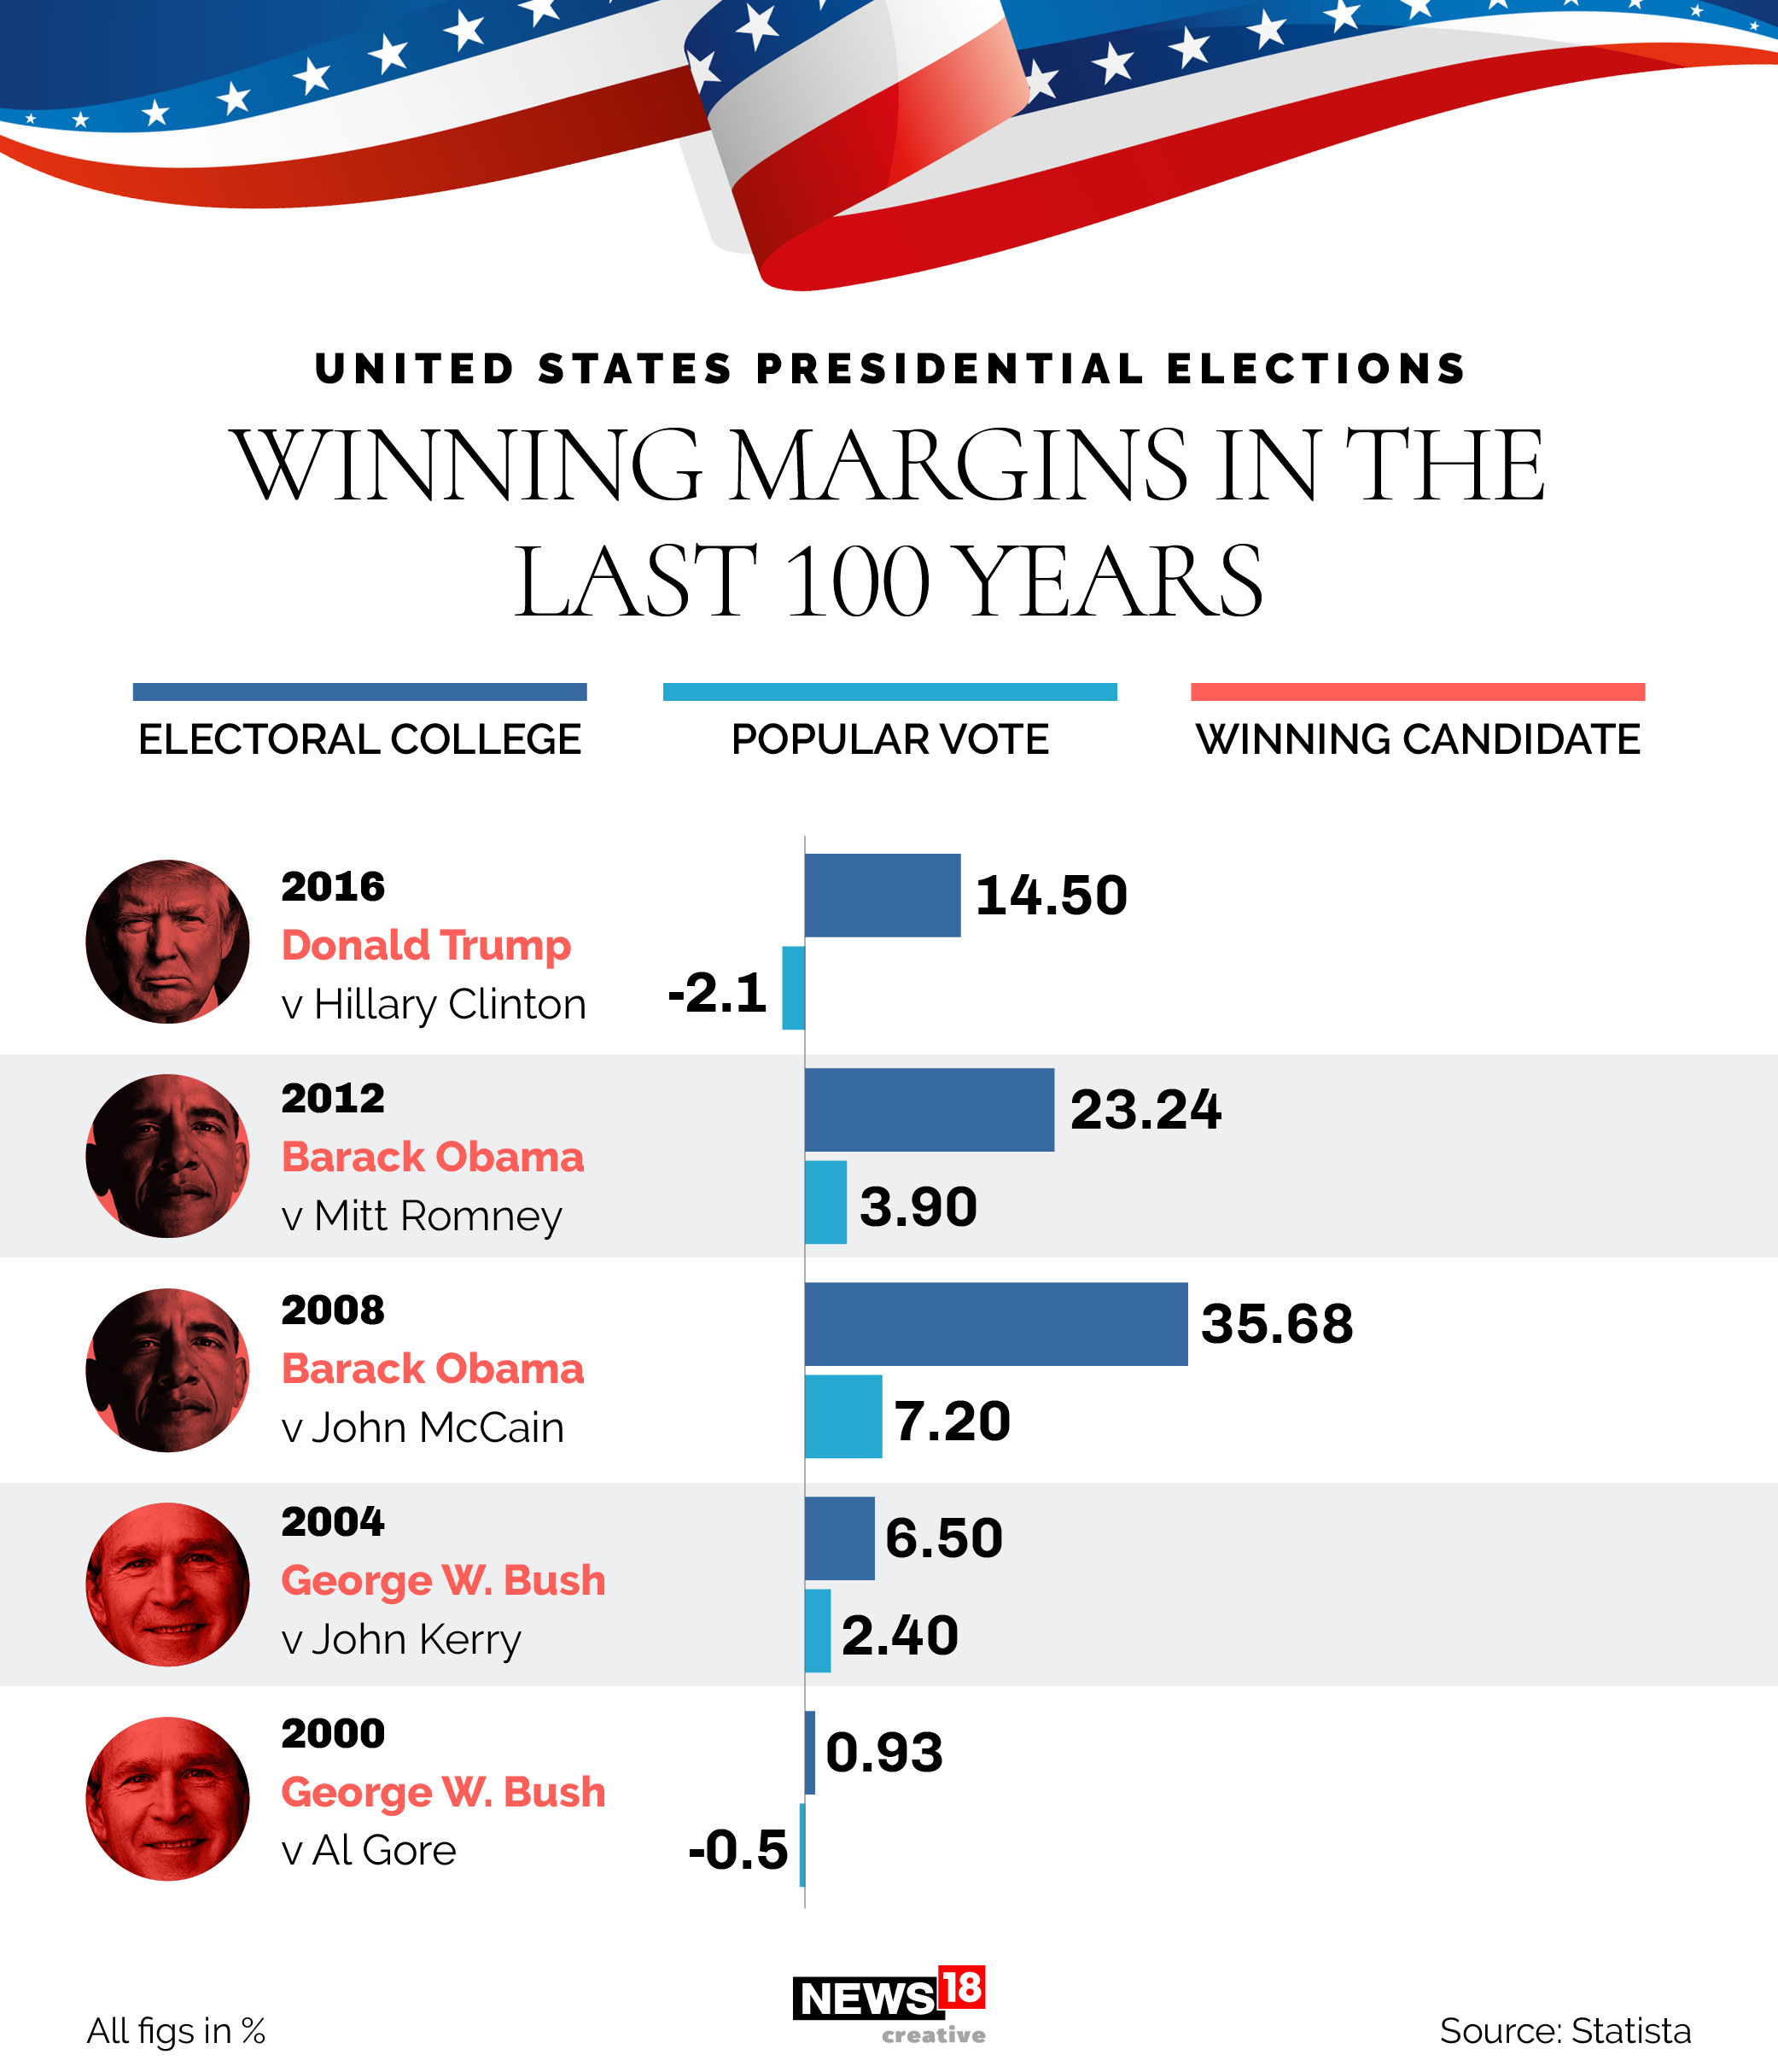 US elections: Winning margins in the last 100 years